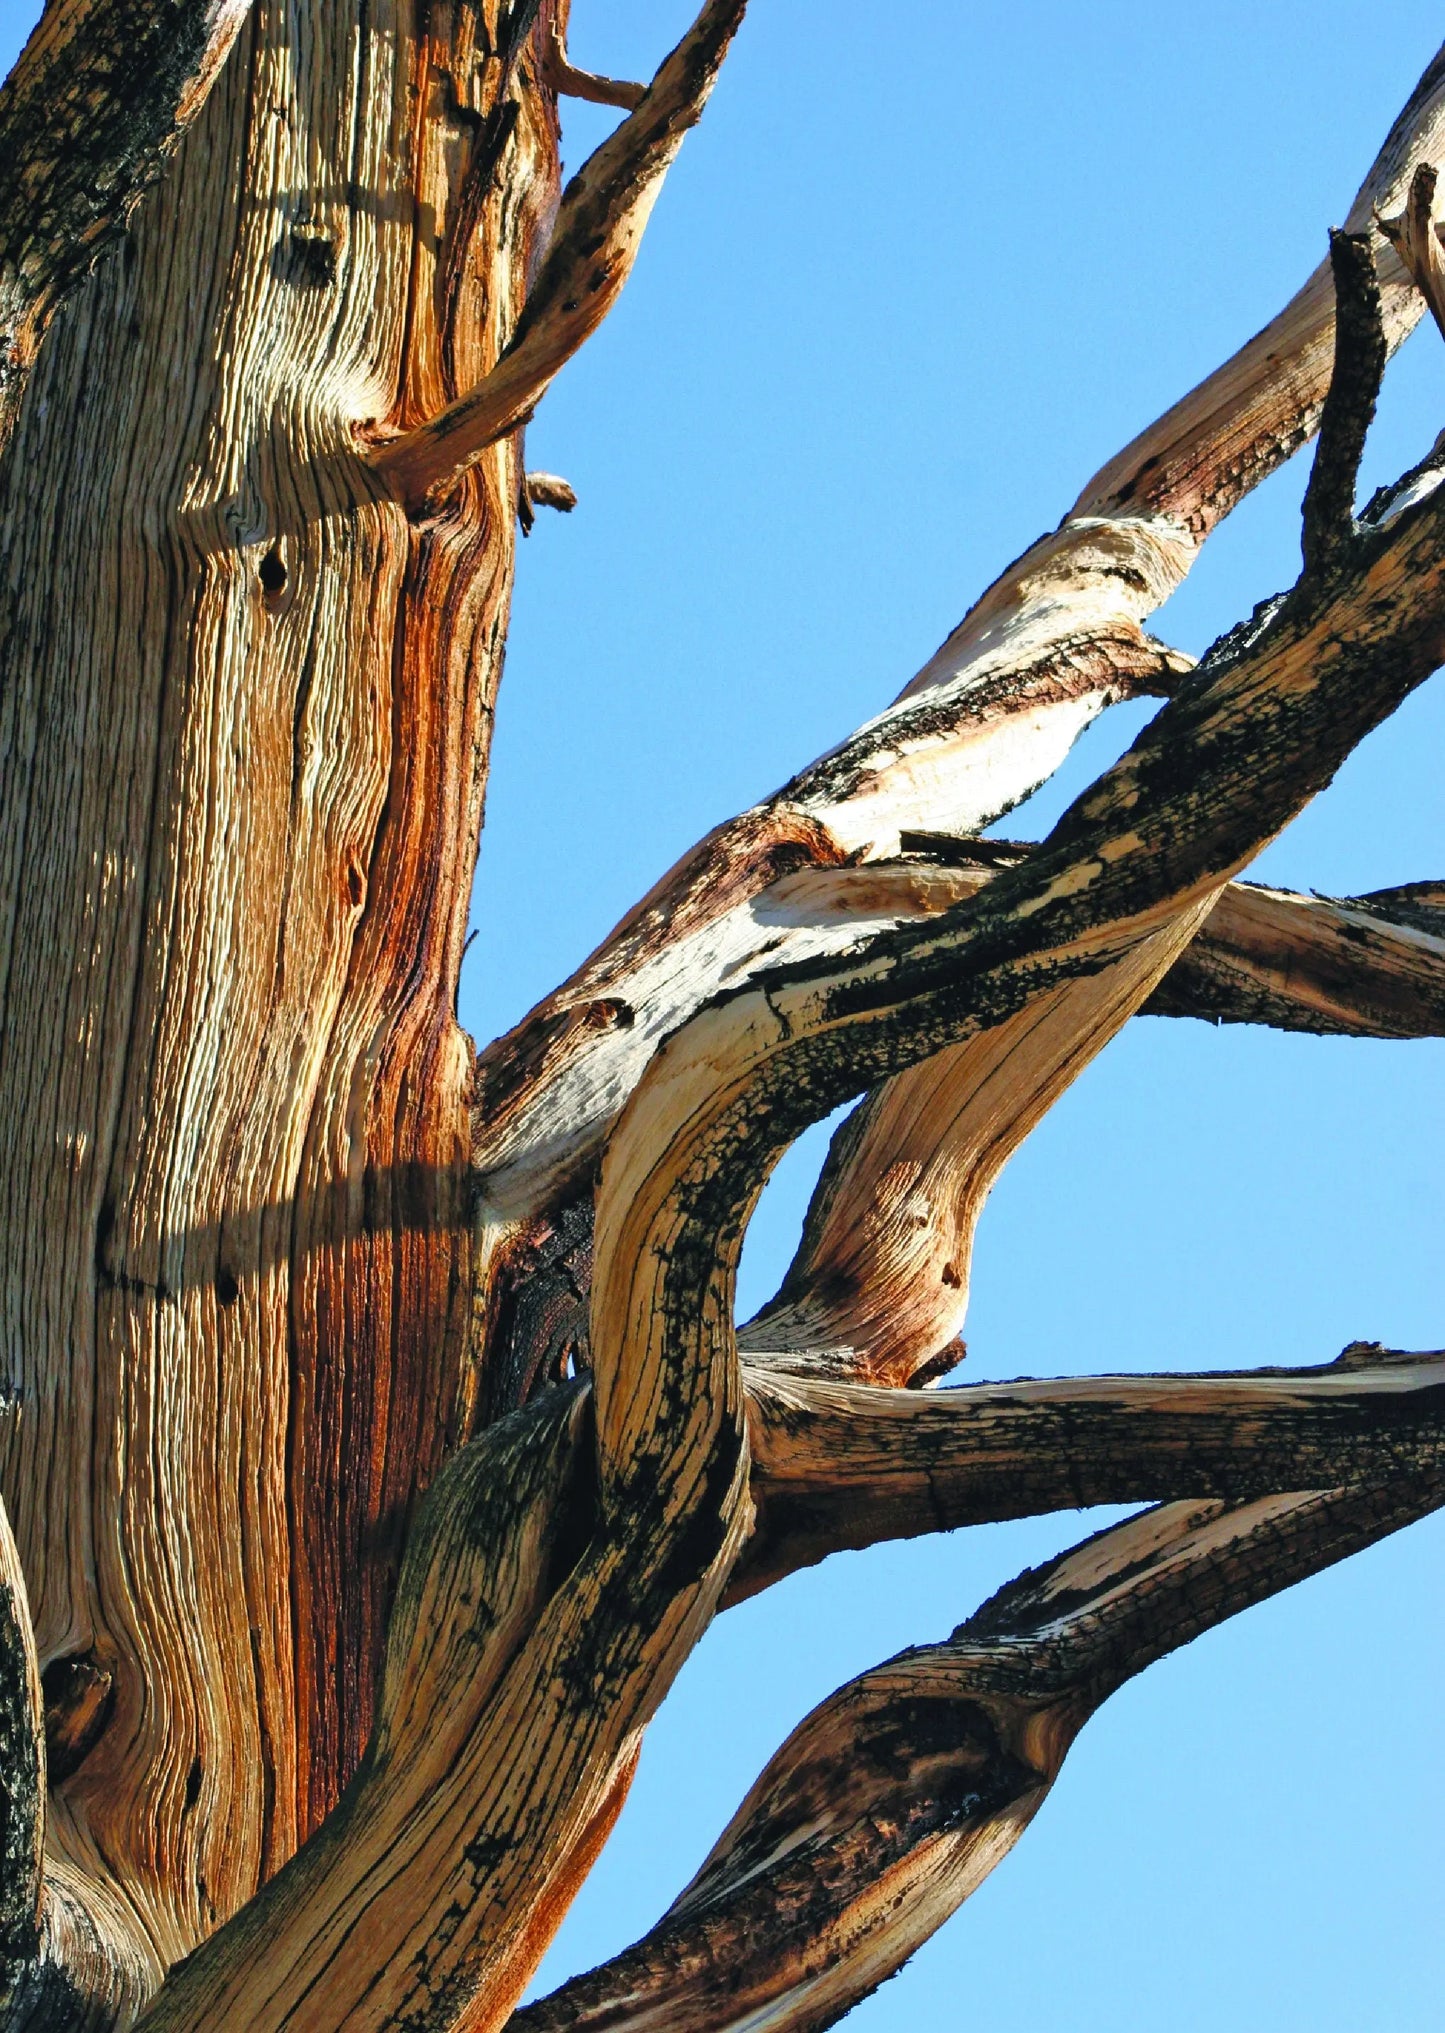 A close-up photo of an ancient bristlecone pine tree, its gnarled bark weathered and twisted by millennia, standing tall in the White Mountains of California. The surrounding landscape is a high-altitude environment with sparse vegetation and rocky terrain.